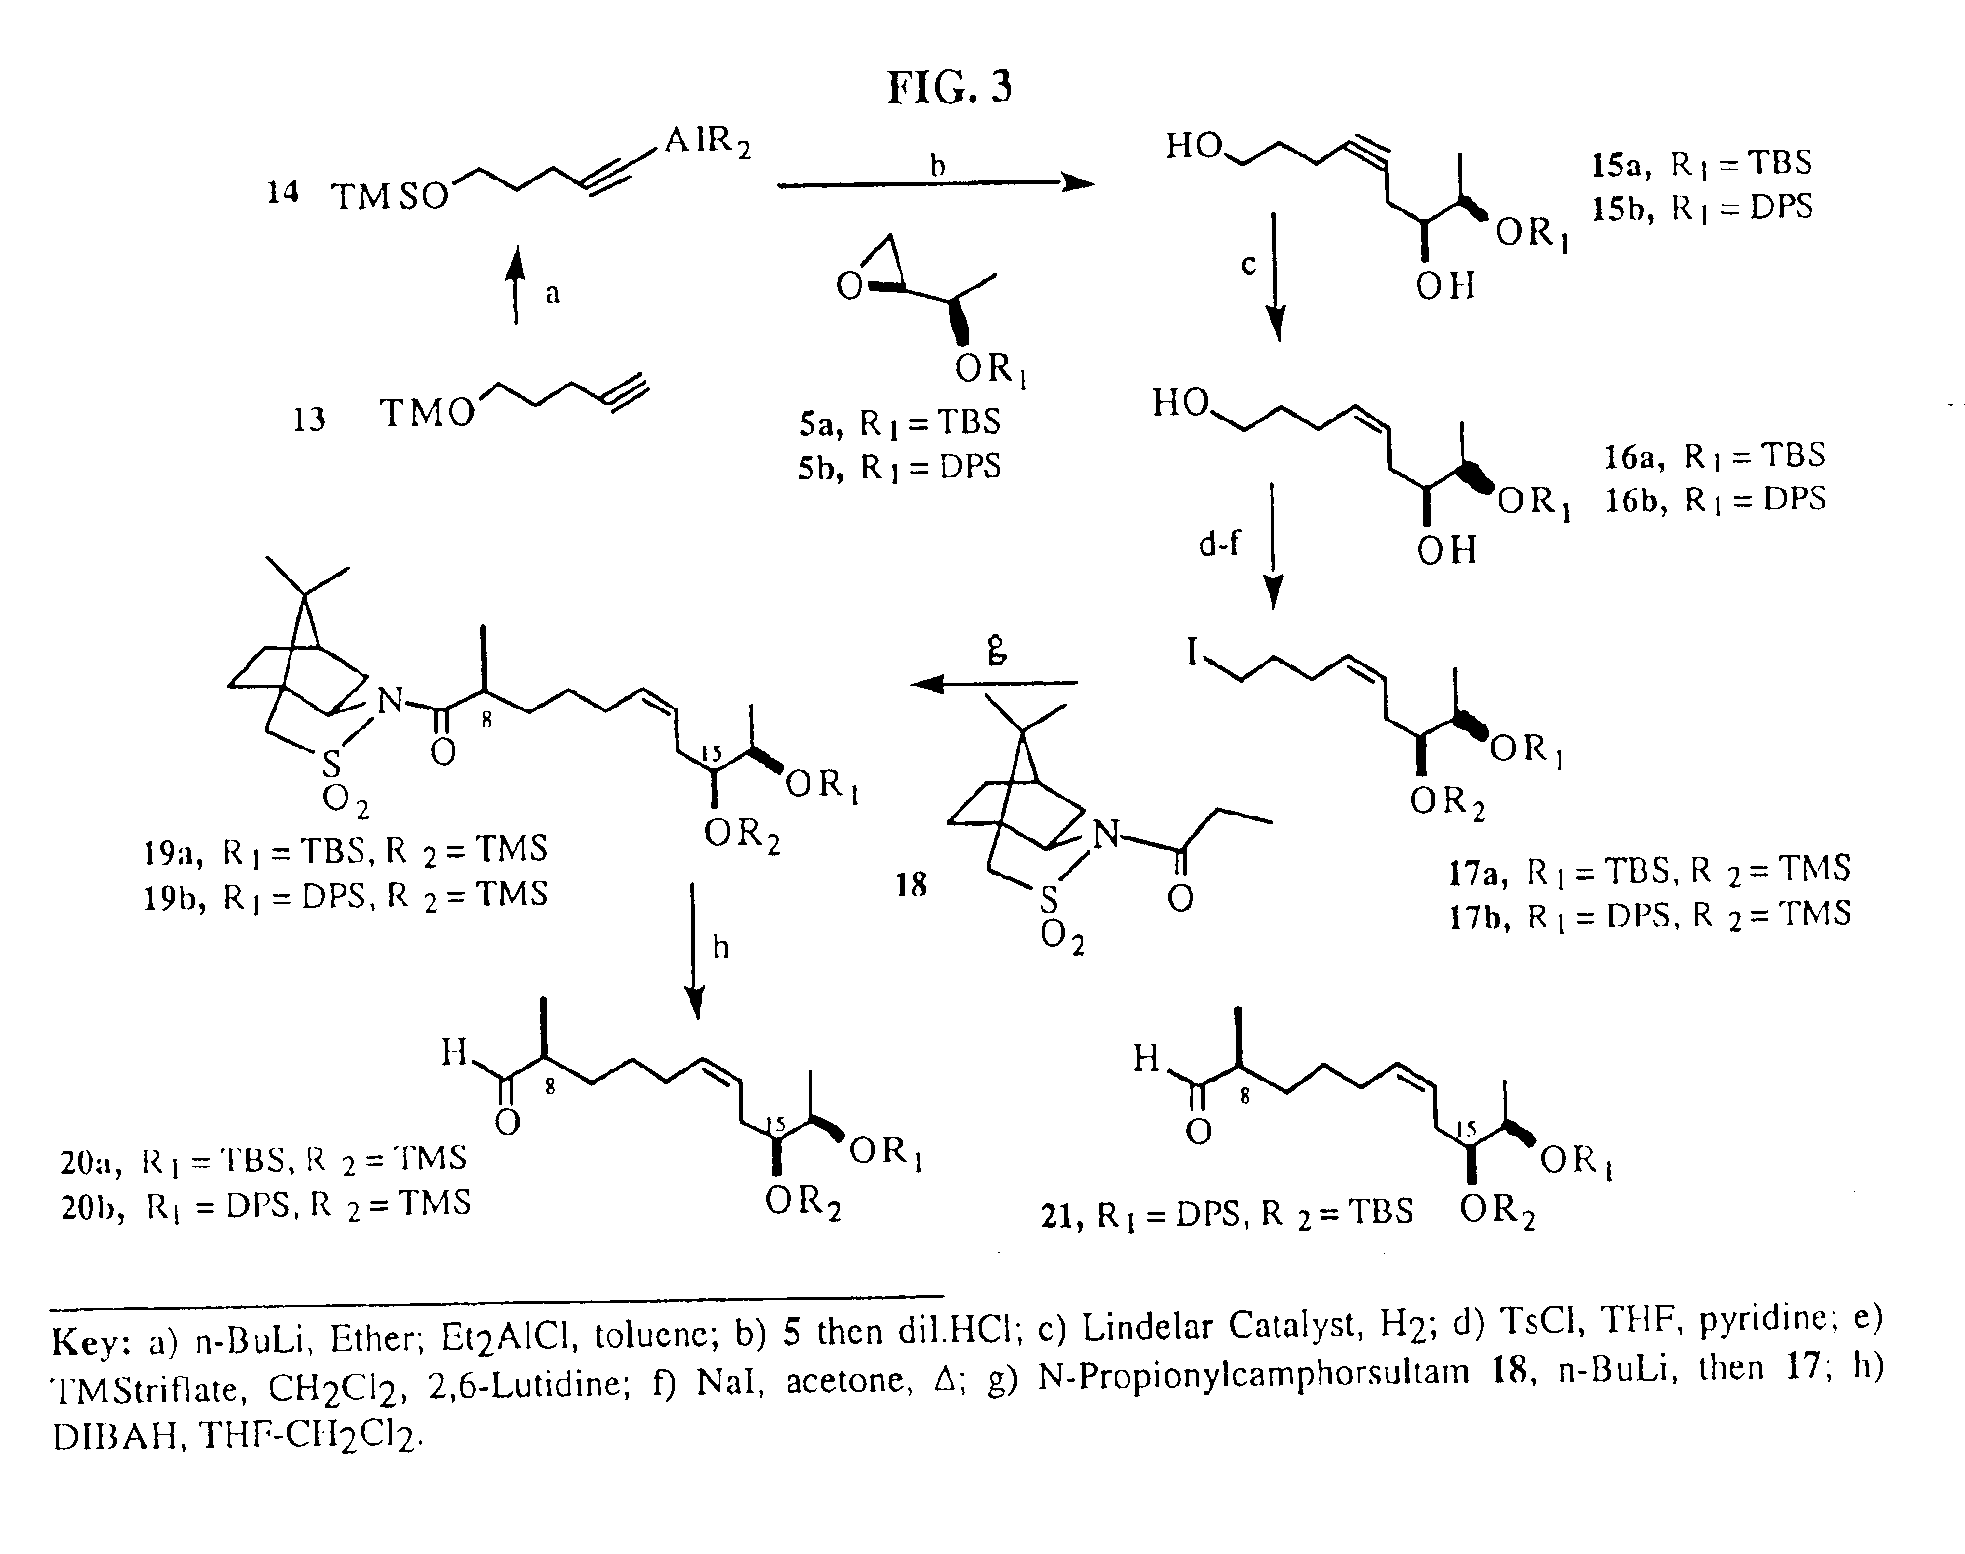 Synthesis of epothilones and related analogs